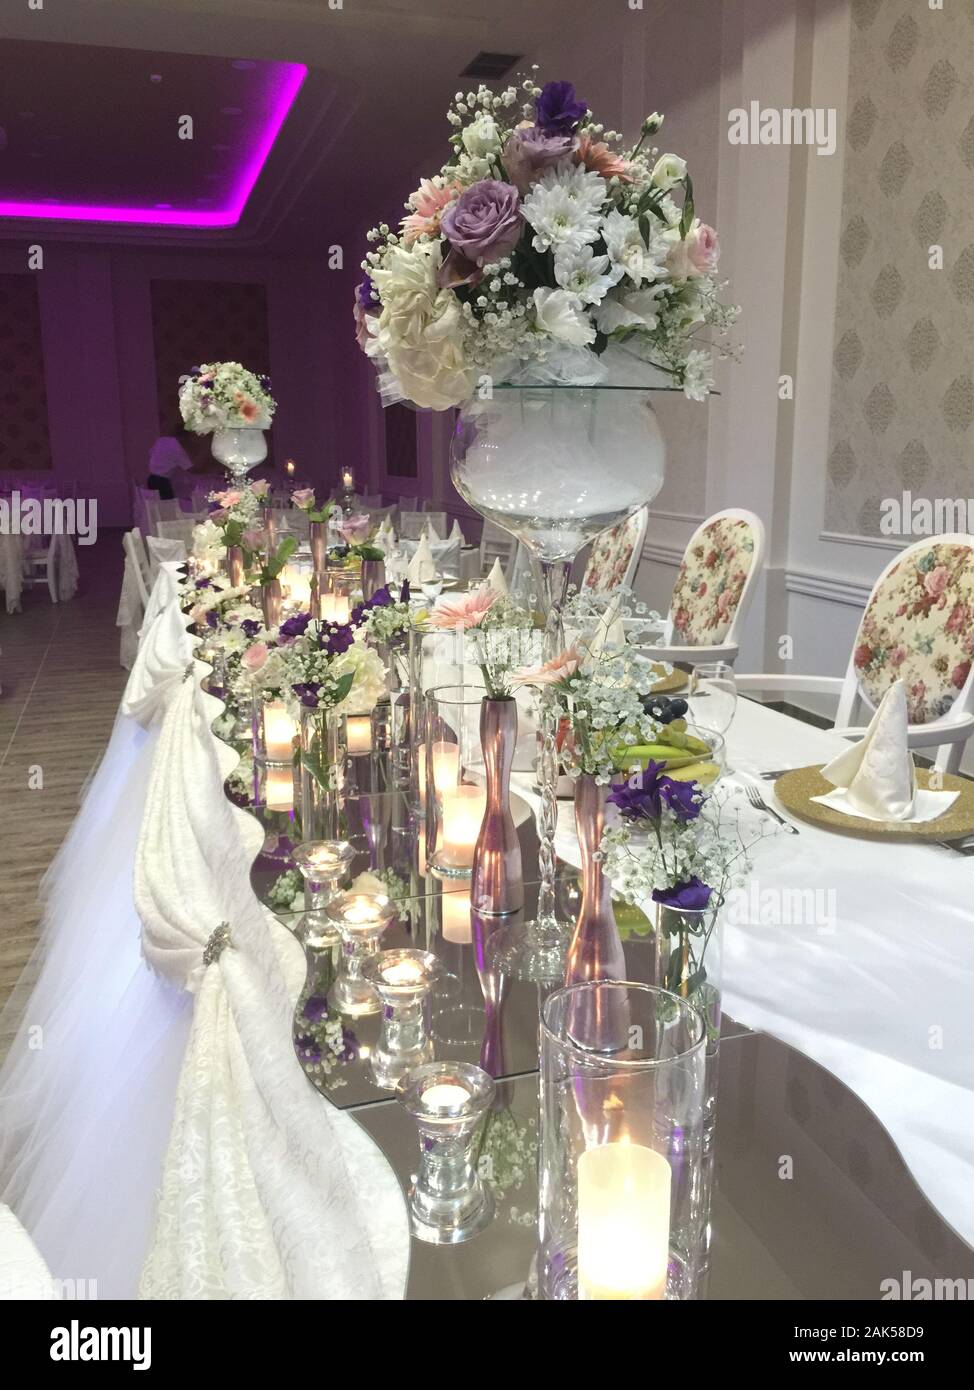 Bride And Groom Table Decorated With Flowers And Candles Image